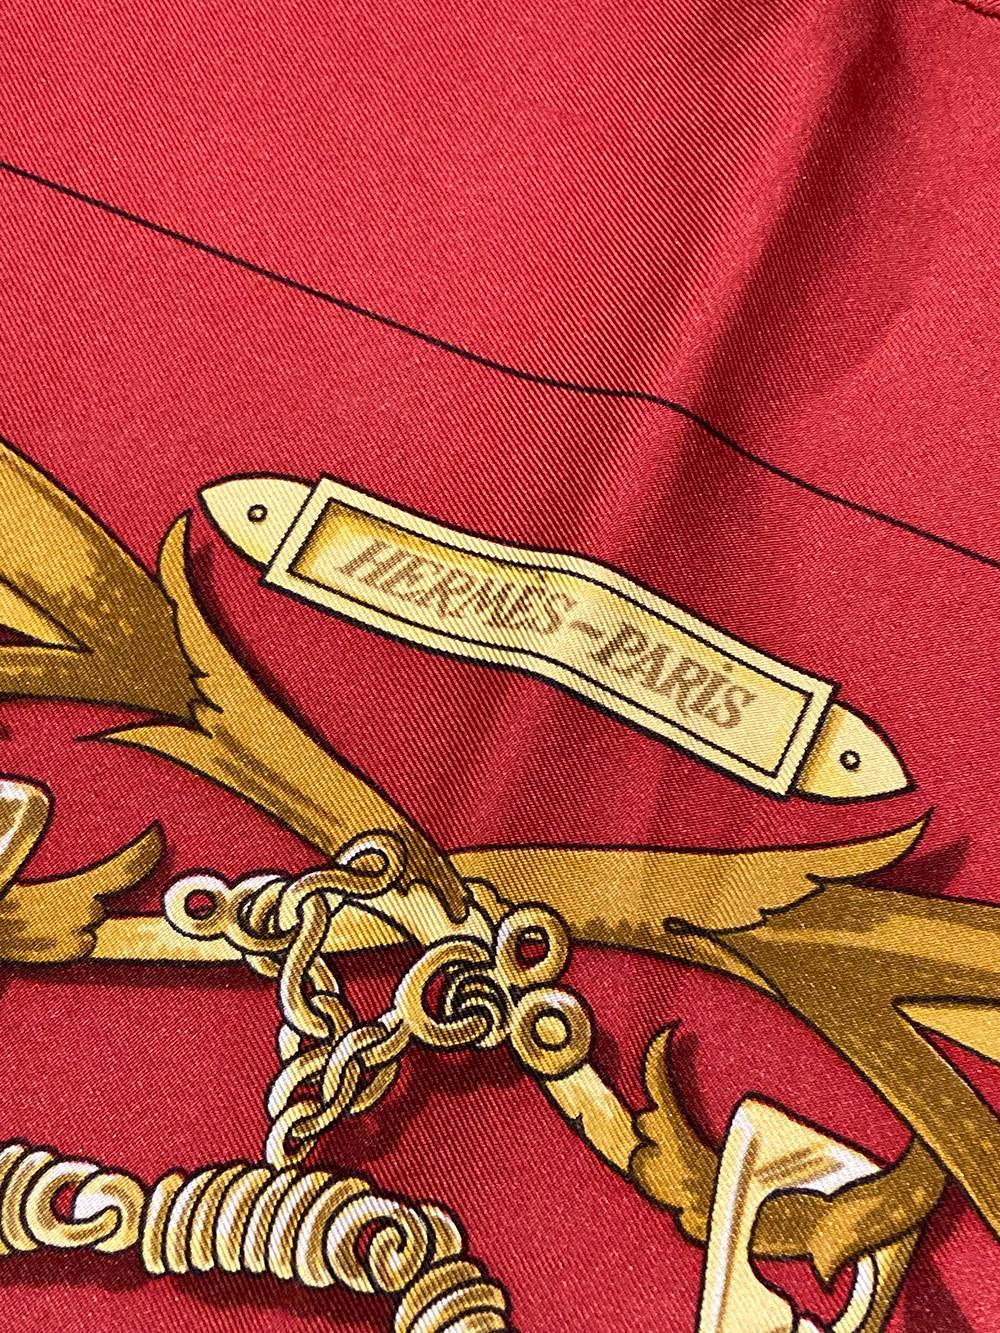 Vintage Hermes Le Mors A La Conétable silk scarf in Red c1970s in very good condition. Original silk screen design c1970 by Henri d'Origny features a beautiful gold ribbon design over a deep red background. 100% silk, hand rolled hem. signed by